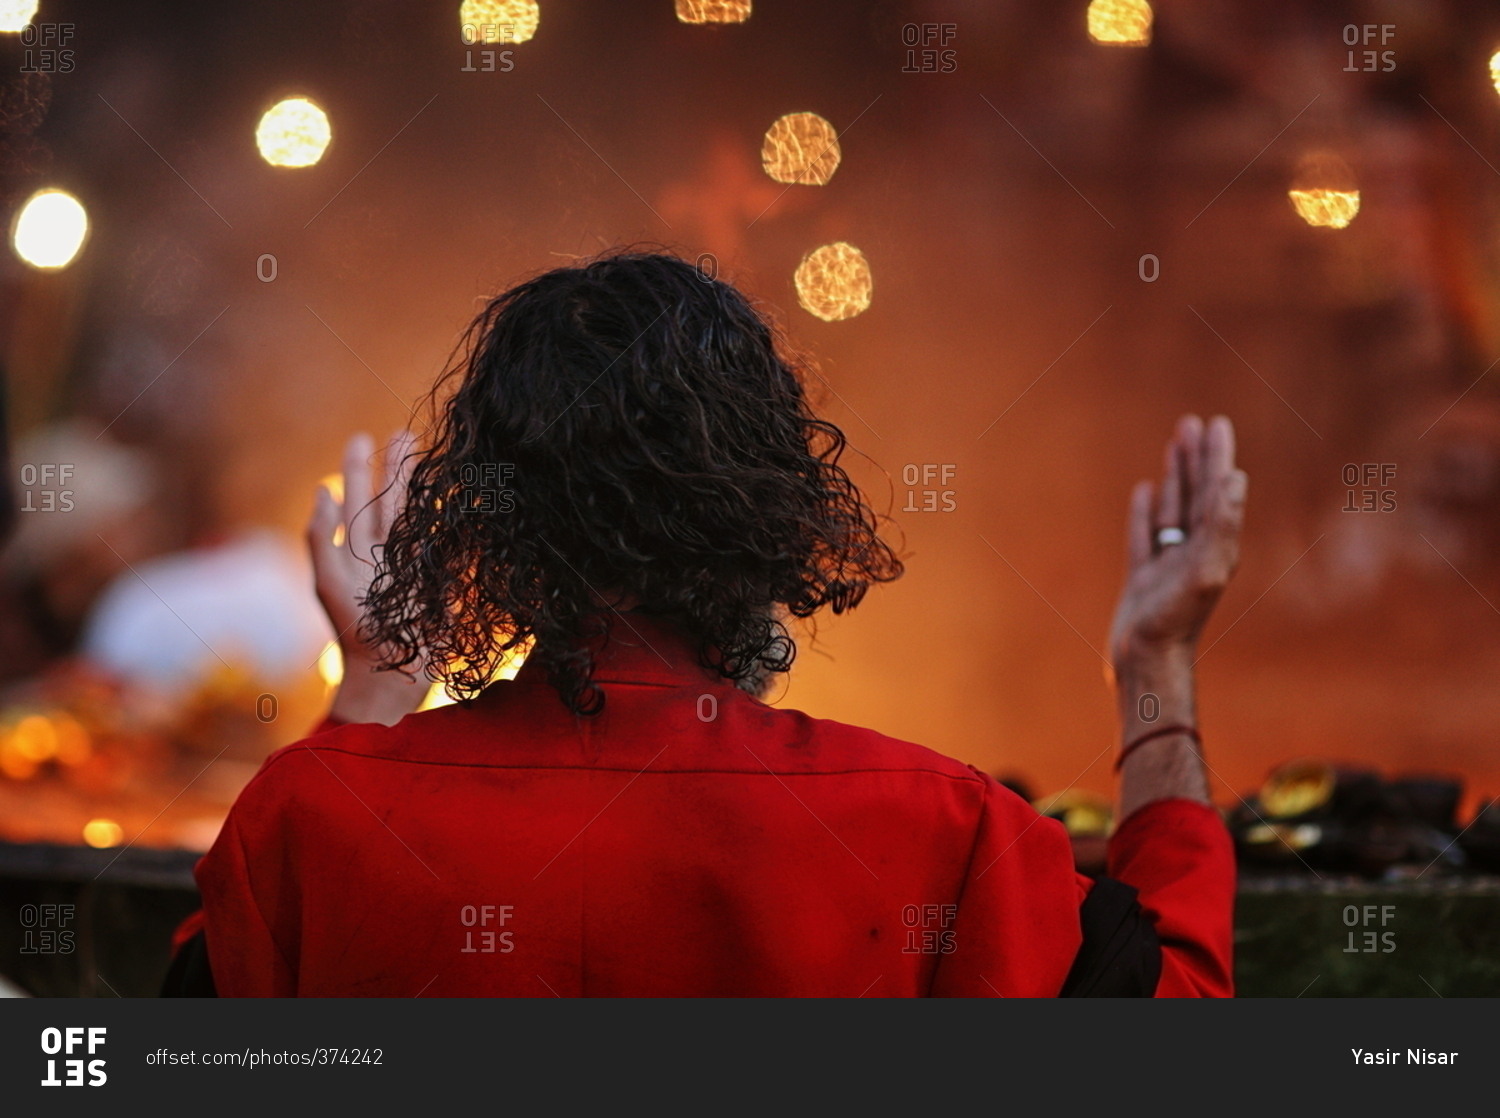 Man in a red jacket raising his hands in prayer